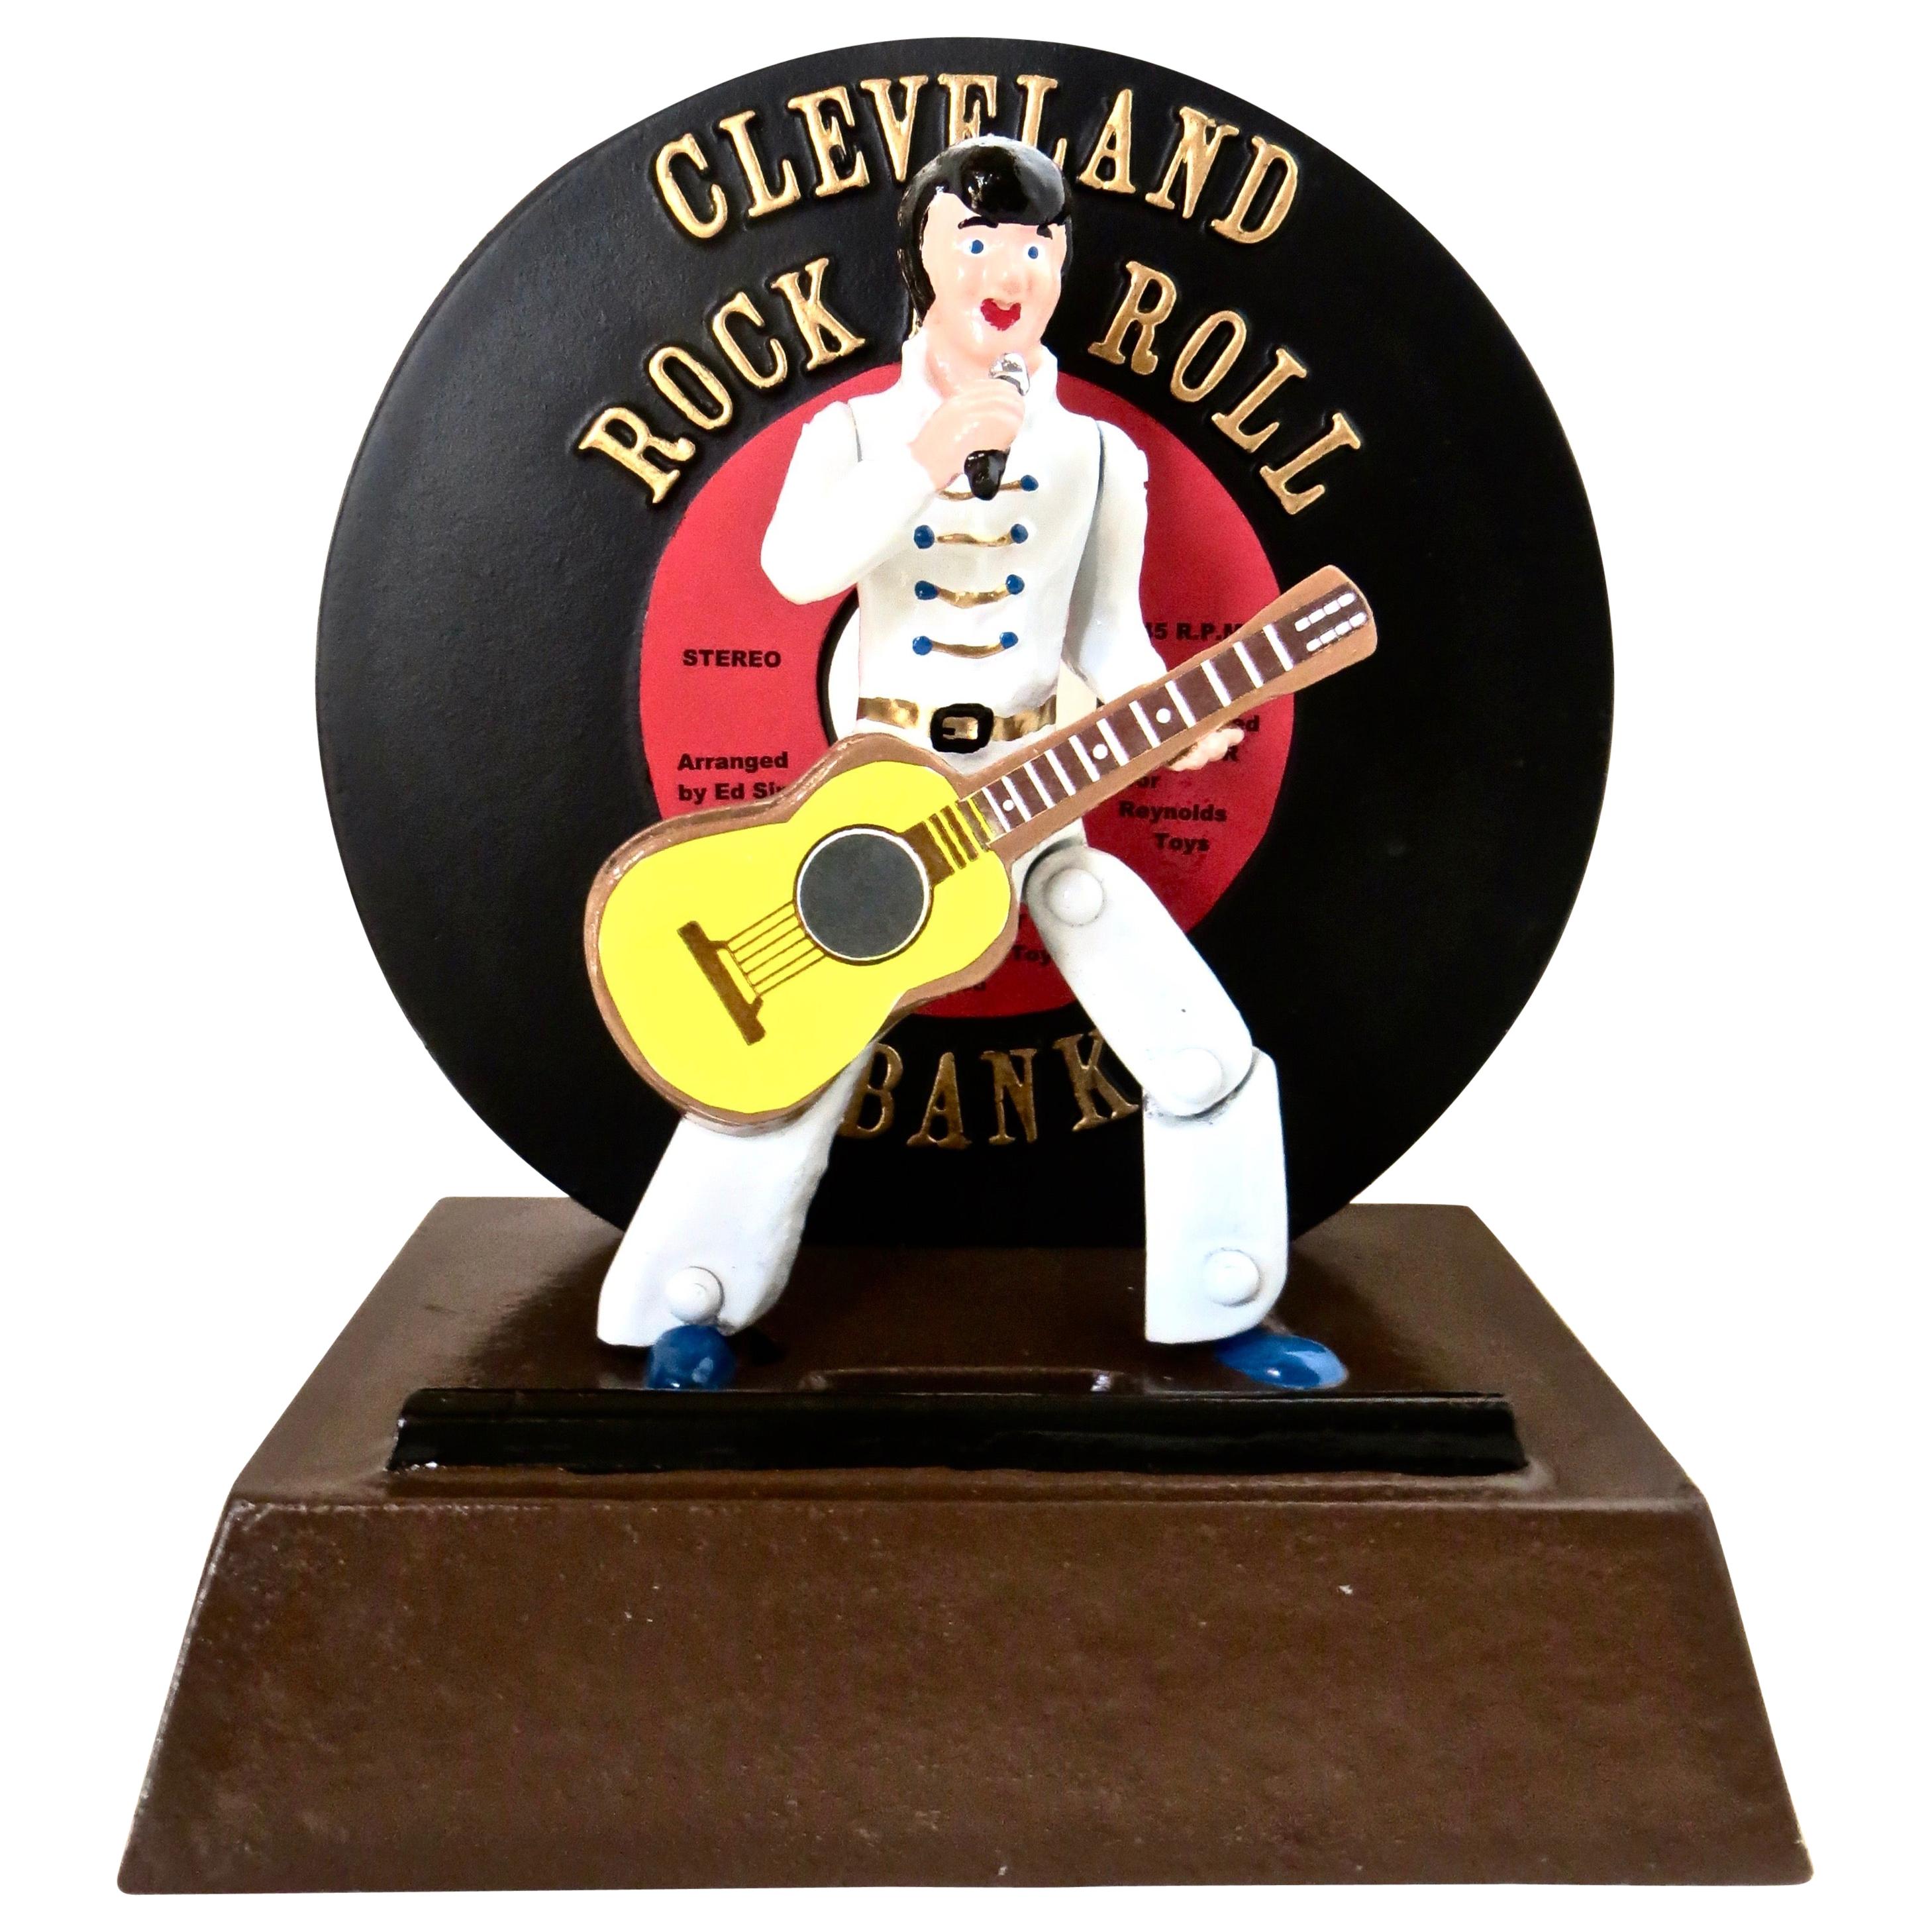 Elvis Presley Commemorative Mechanical Bank "Cleveland Rock and Roll" circa 2006